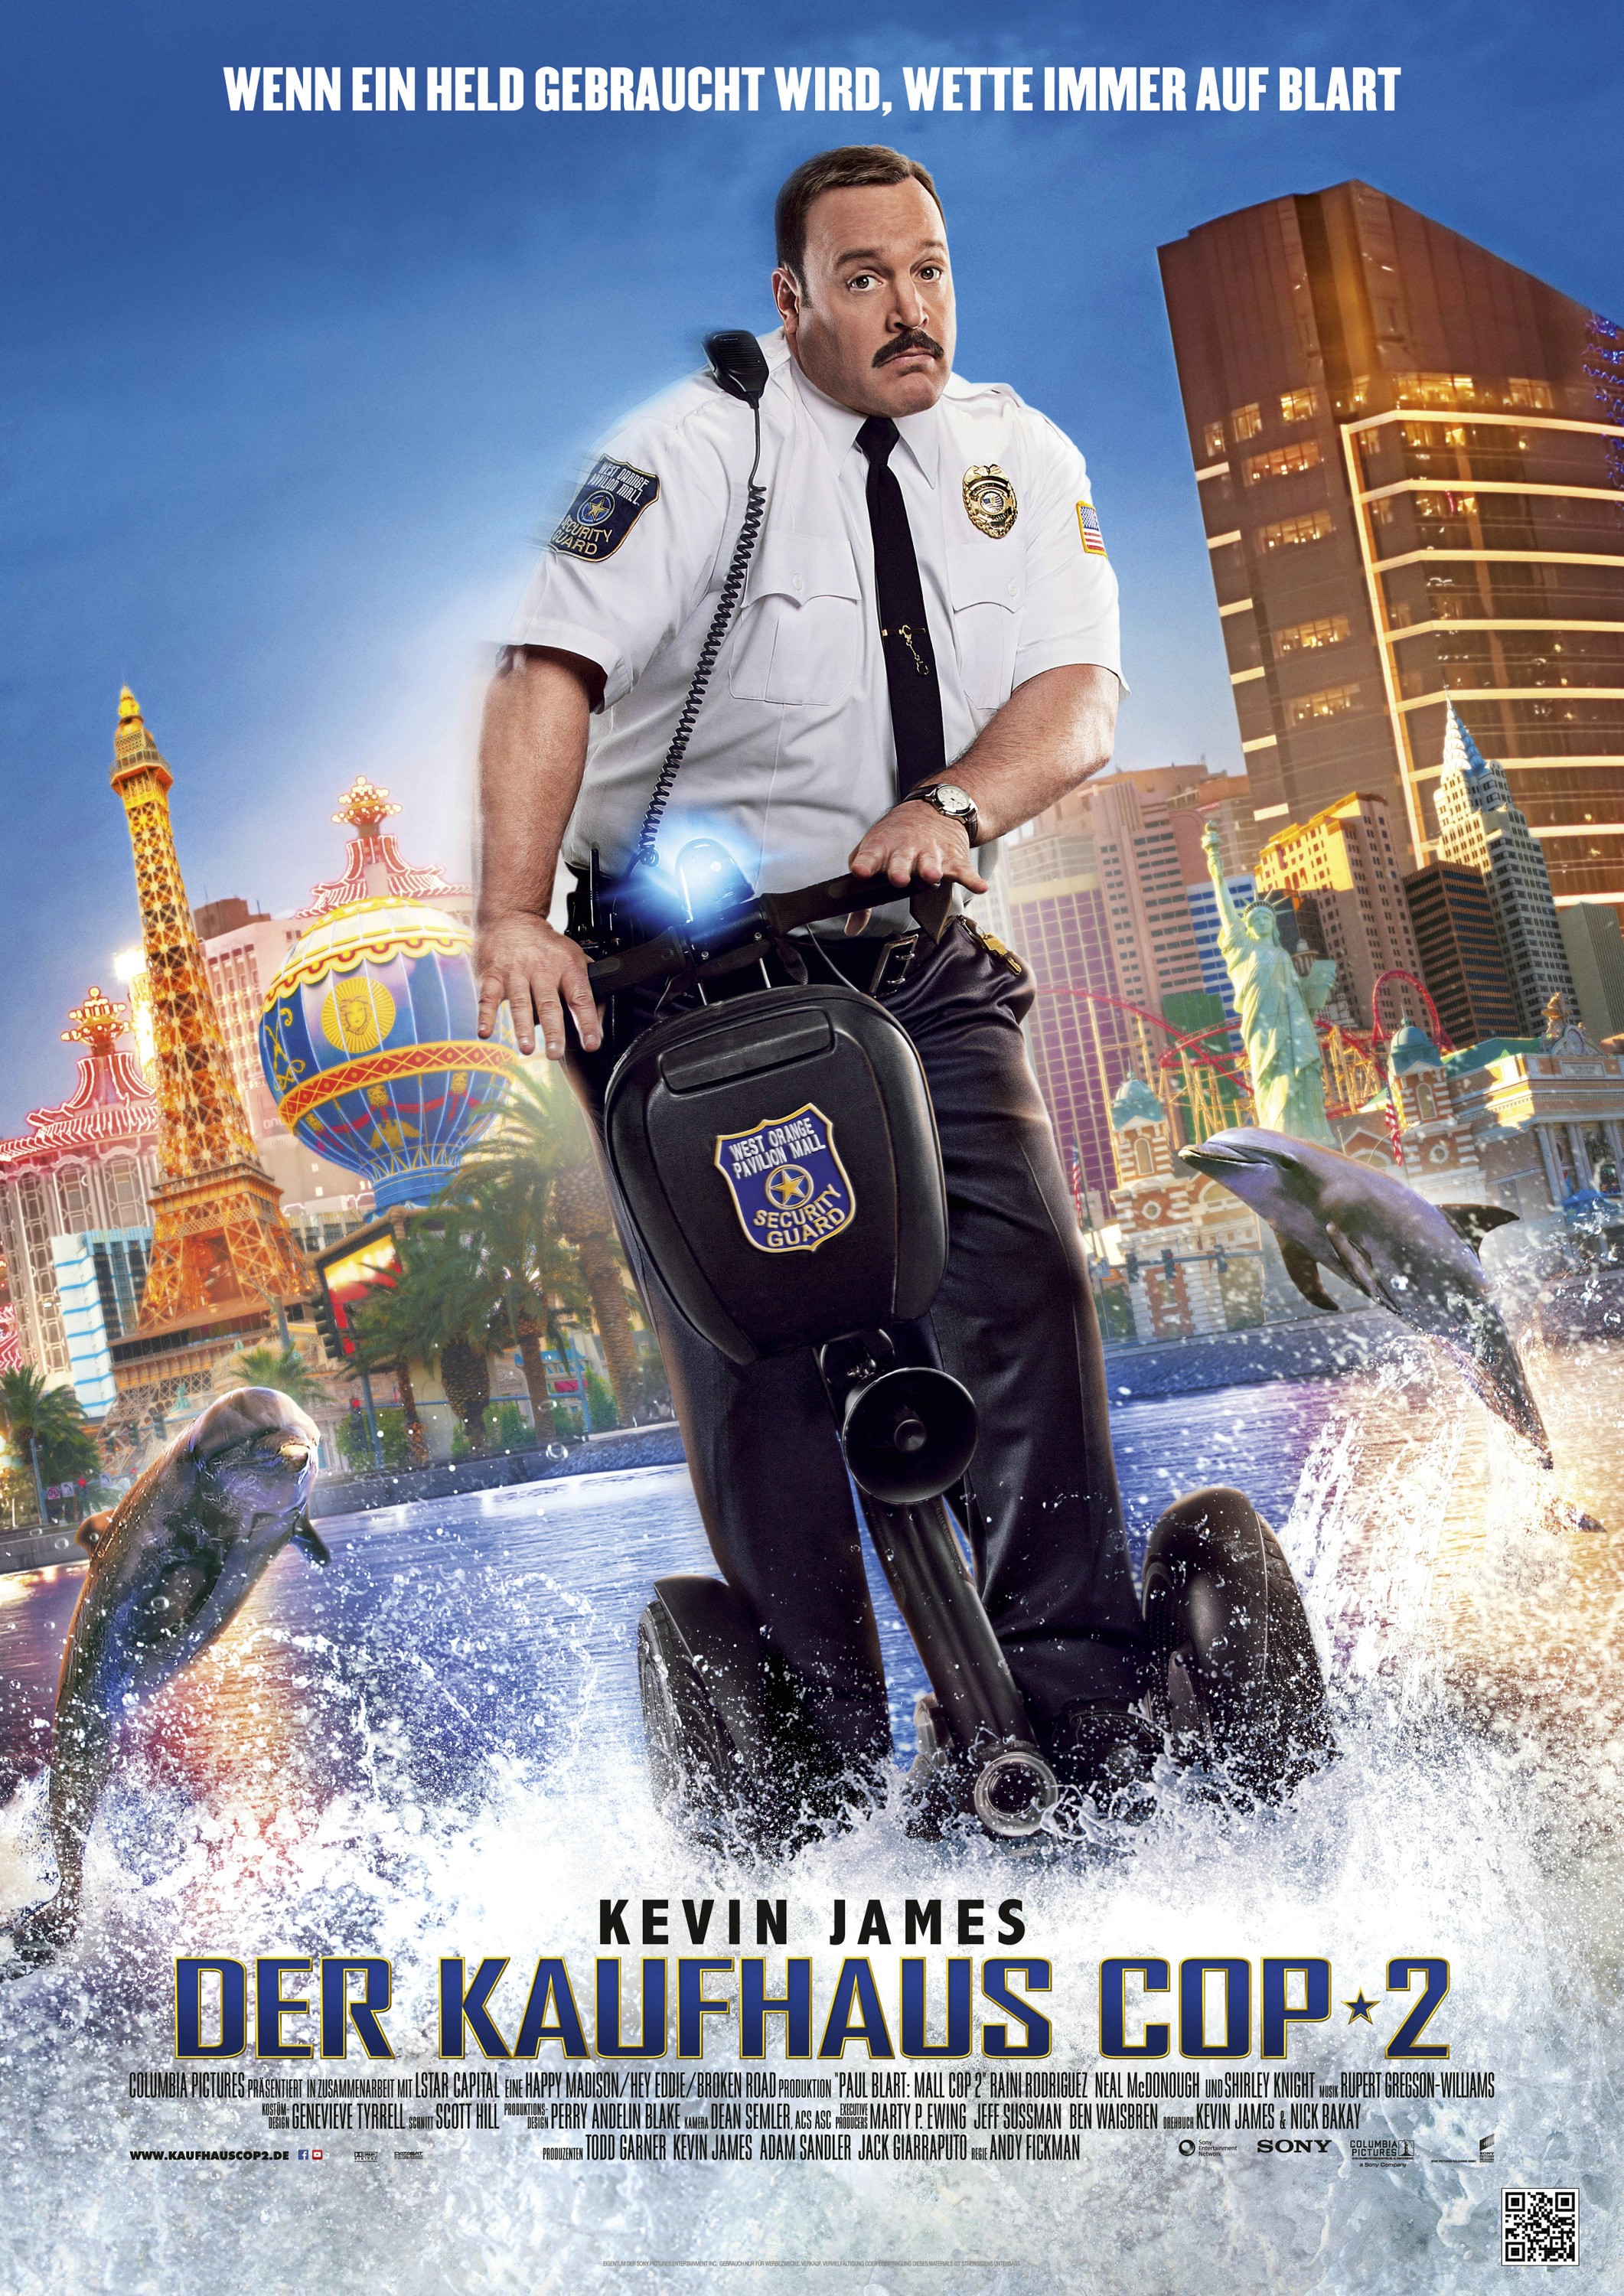 Mega Sized Movie Poster Image for Paul Blart: Mall Cop 2 (#2 of 5)